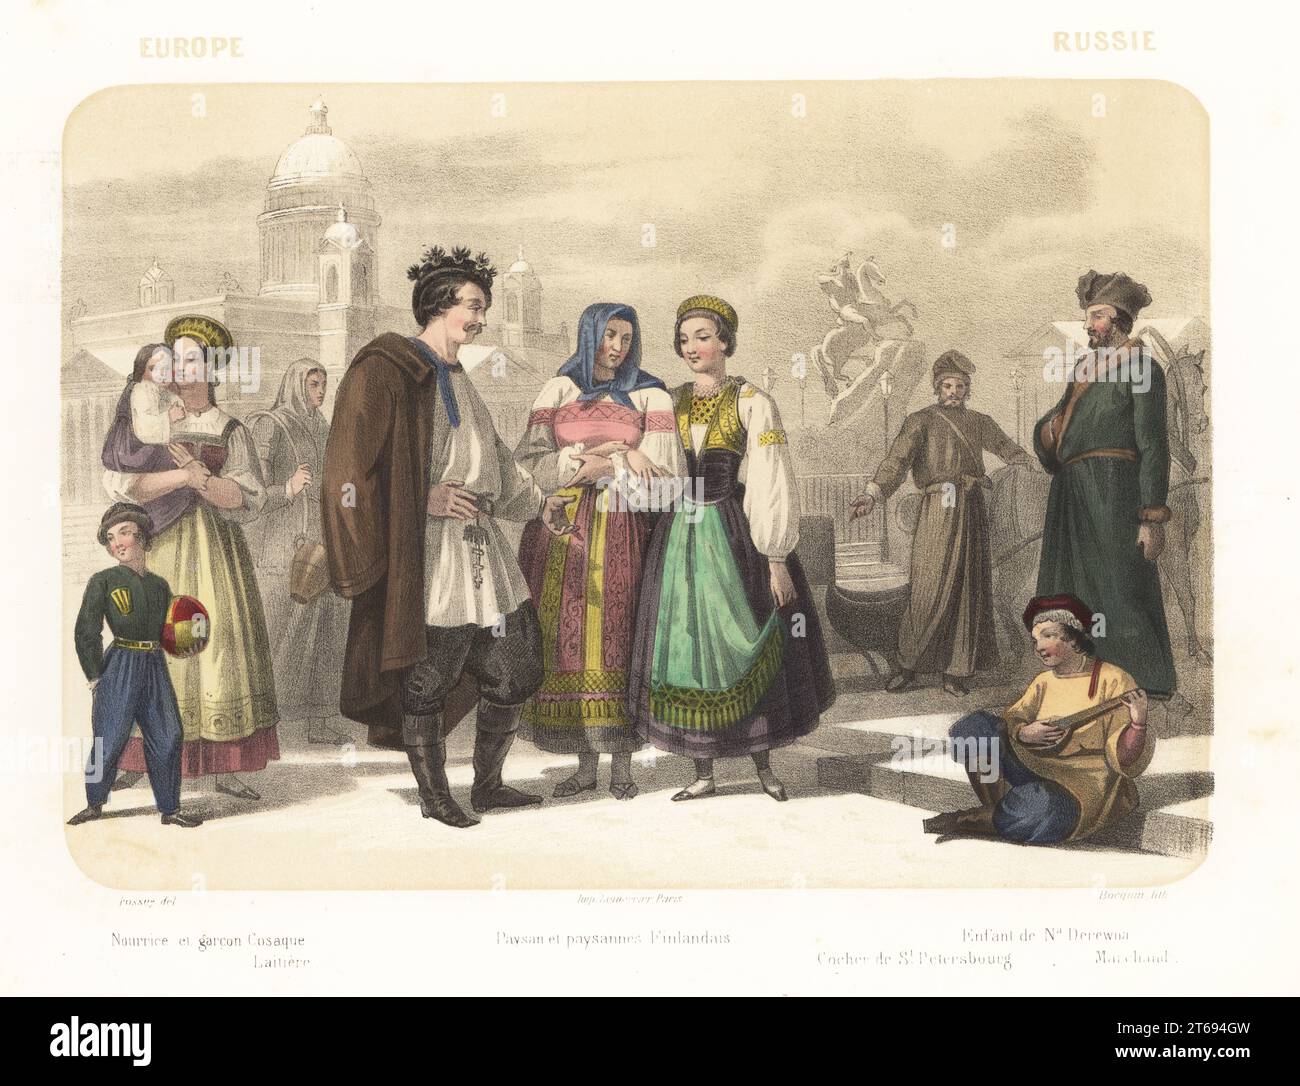 Costumes of the people of Russia, 1858. Nanny with Cossack boy, milkmaid with milkpail, Finnish peasants, sleigh driver, merchant, boy from Derewna, Belarus, playing a domra lute. In Senatskaia Square in St. Petersburg with the Bronze Horseman statue of Peter the Great and St. Isaac's Cathedral dome. Nourrice et garcon Cosaque, laitiere, paysan et paysannes Finlandais, cocher de St. Petersburg, marchand, enfant de Na. Derewna. Handcoloured and sepia-tinted lithograph by Jean-Adolphe Bocquin after an illustration by Felix Fossey from Elisabeth Muller (pseudonym of Leonie Bedelet)s Le Monde en E Stock Photo